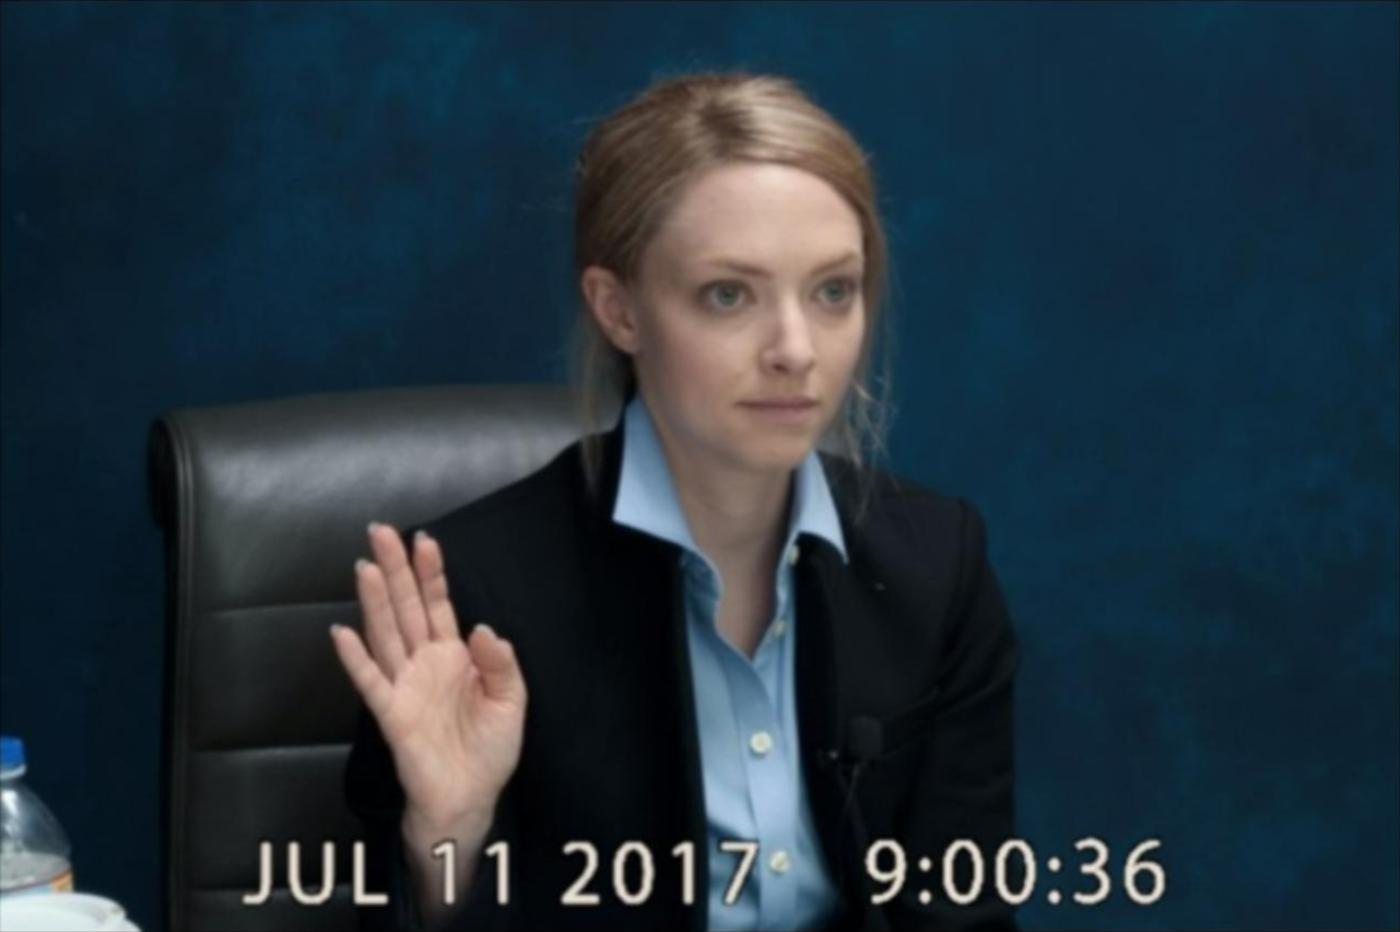 Screenshot from The Dropout series showing Elizabeth Holmes testifying in court